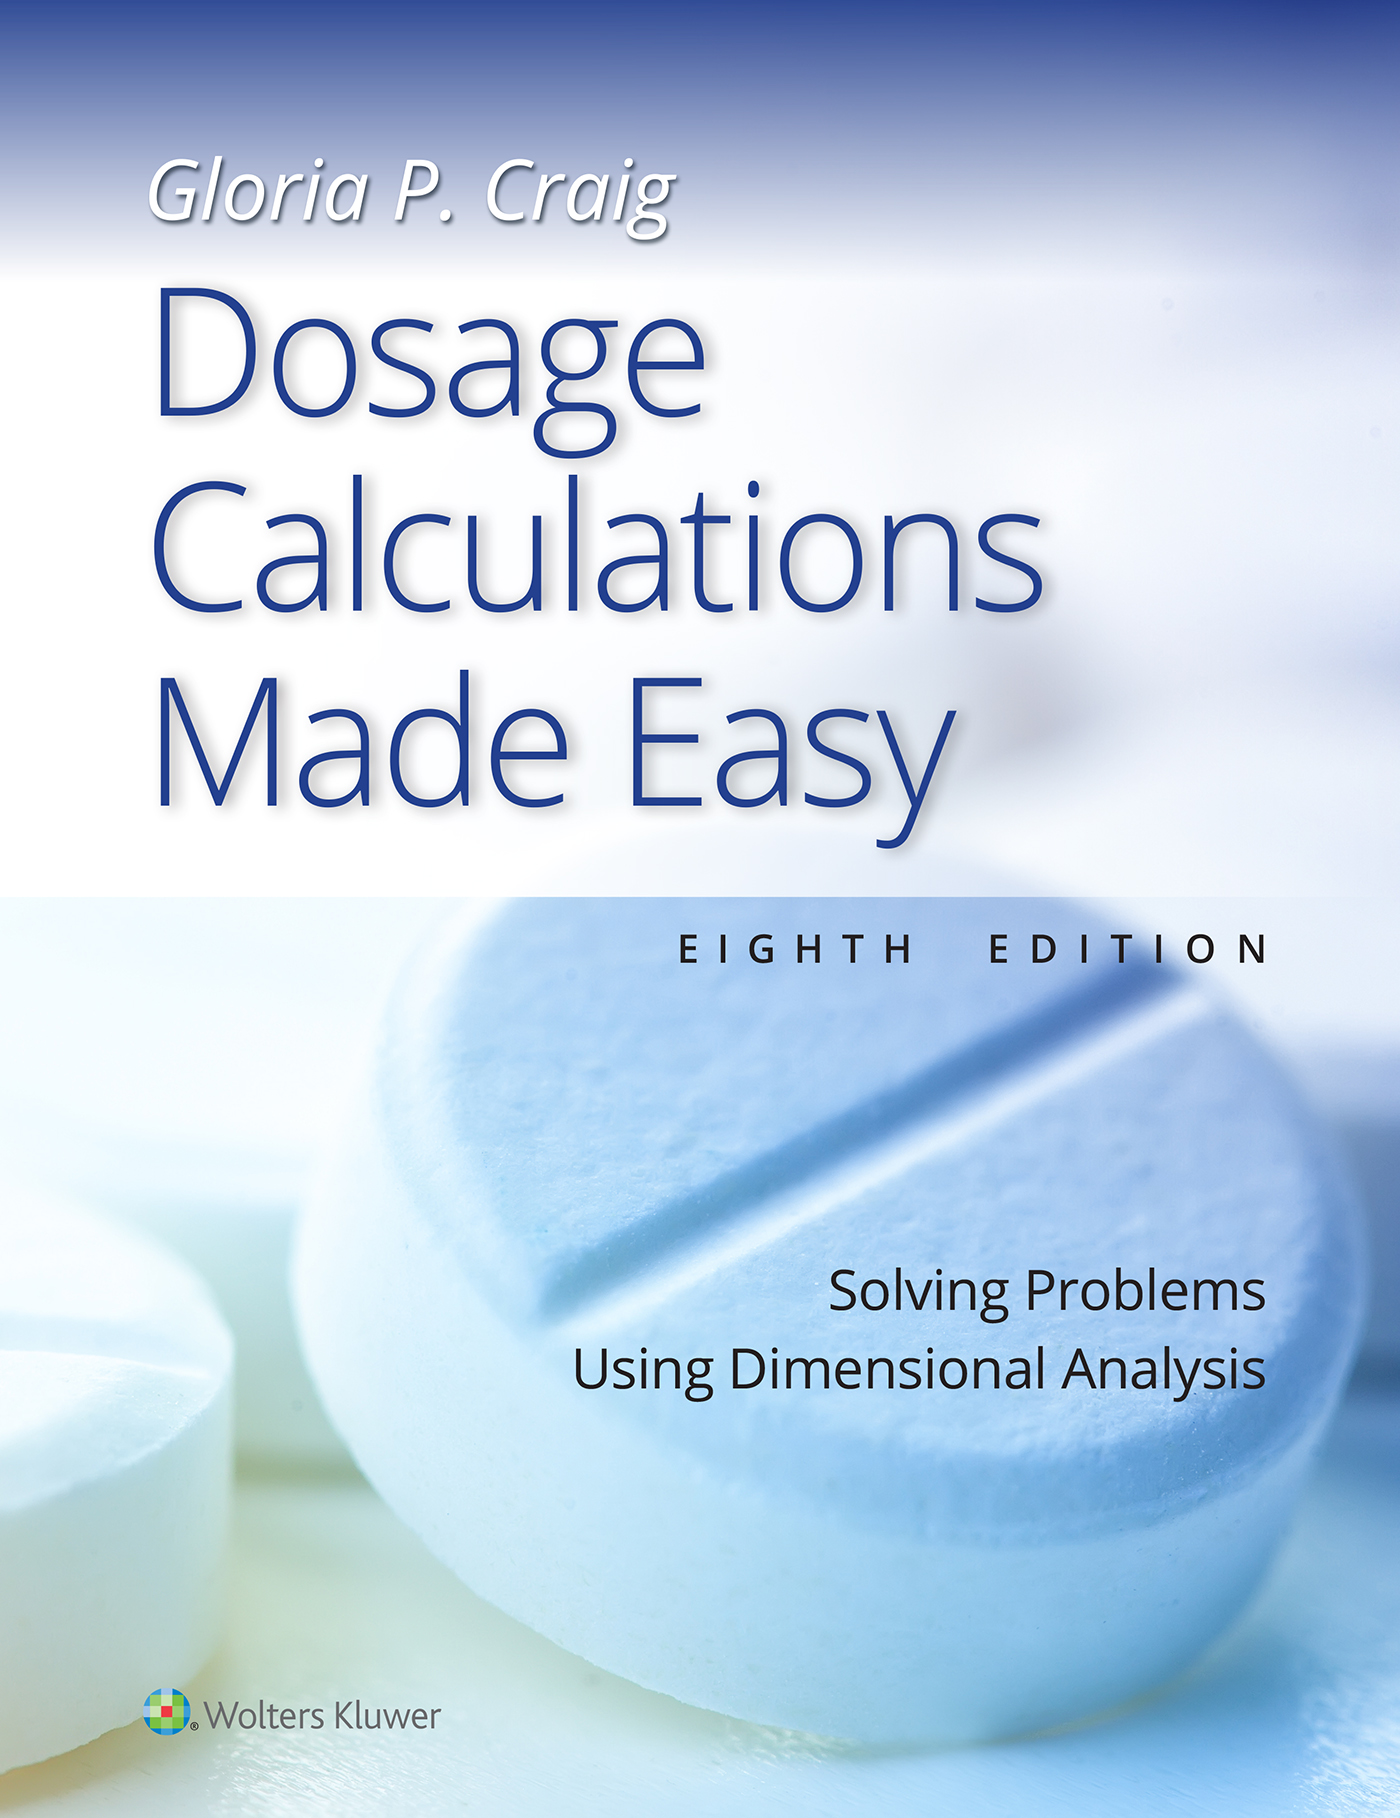 Dosage Calculations Made Easy:  Solving Problems Using Dimensional Analysis